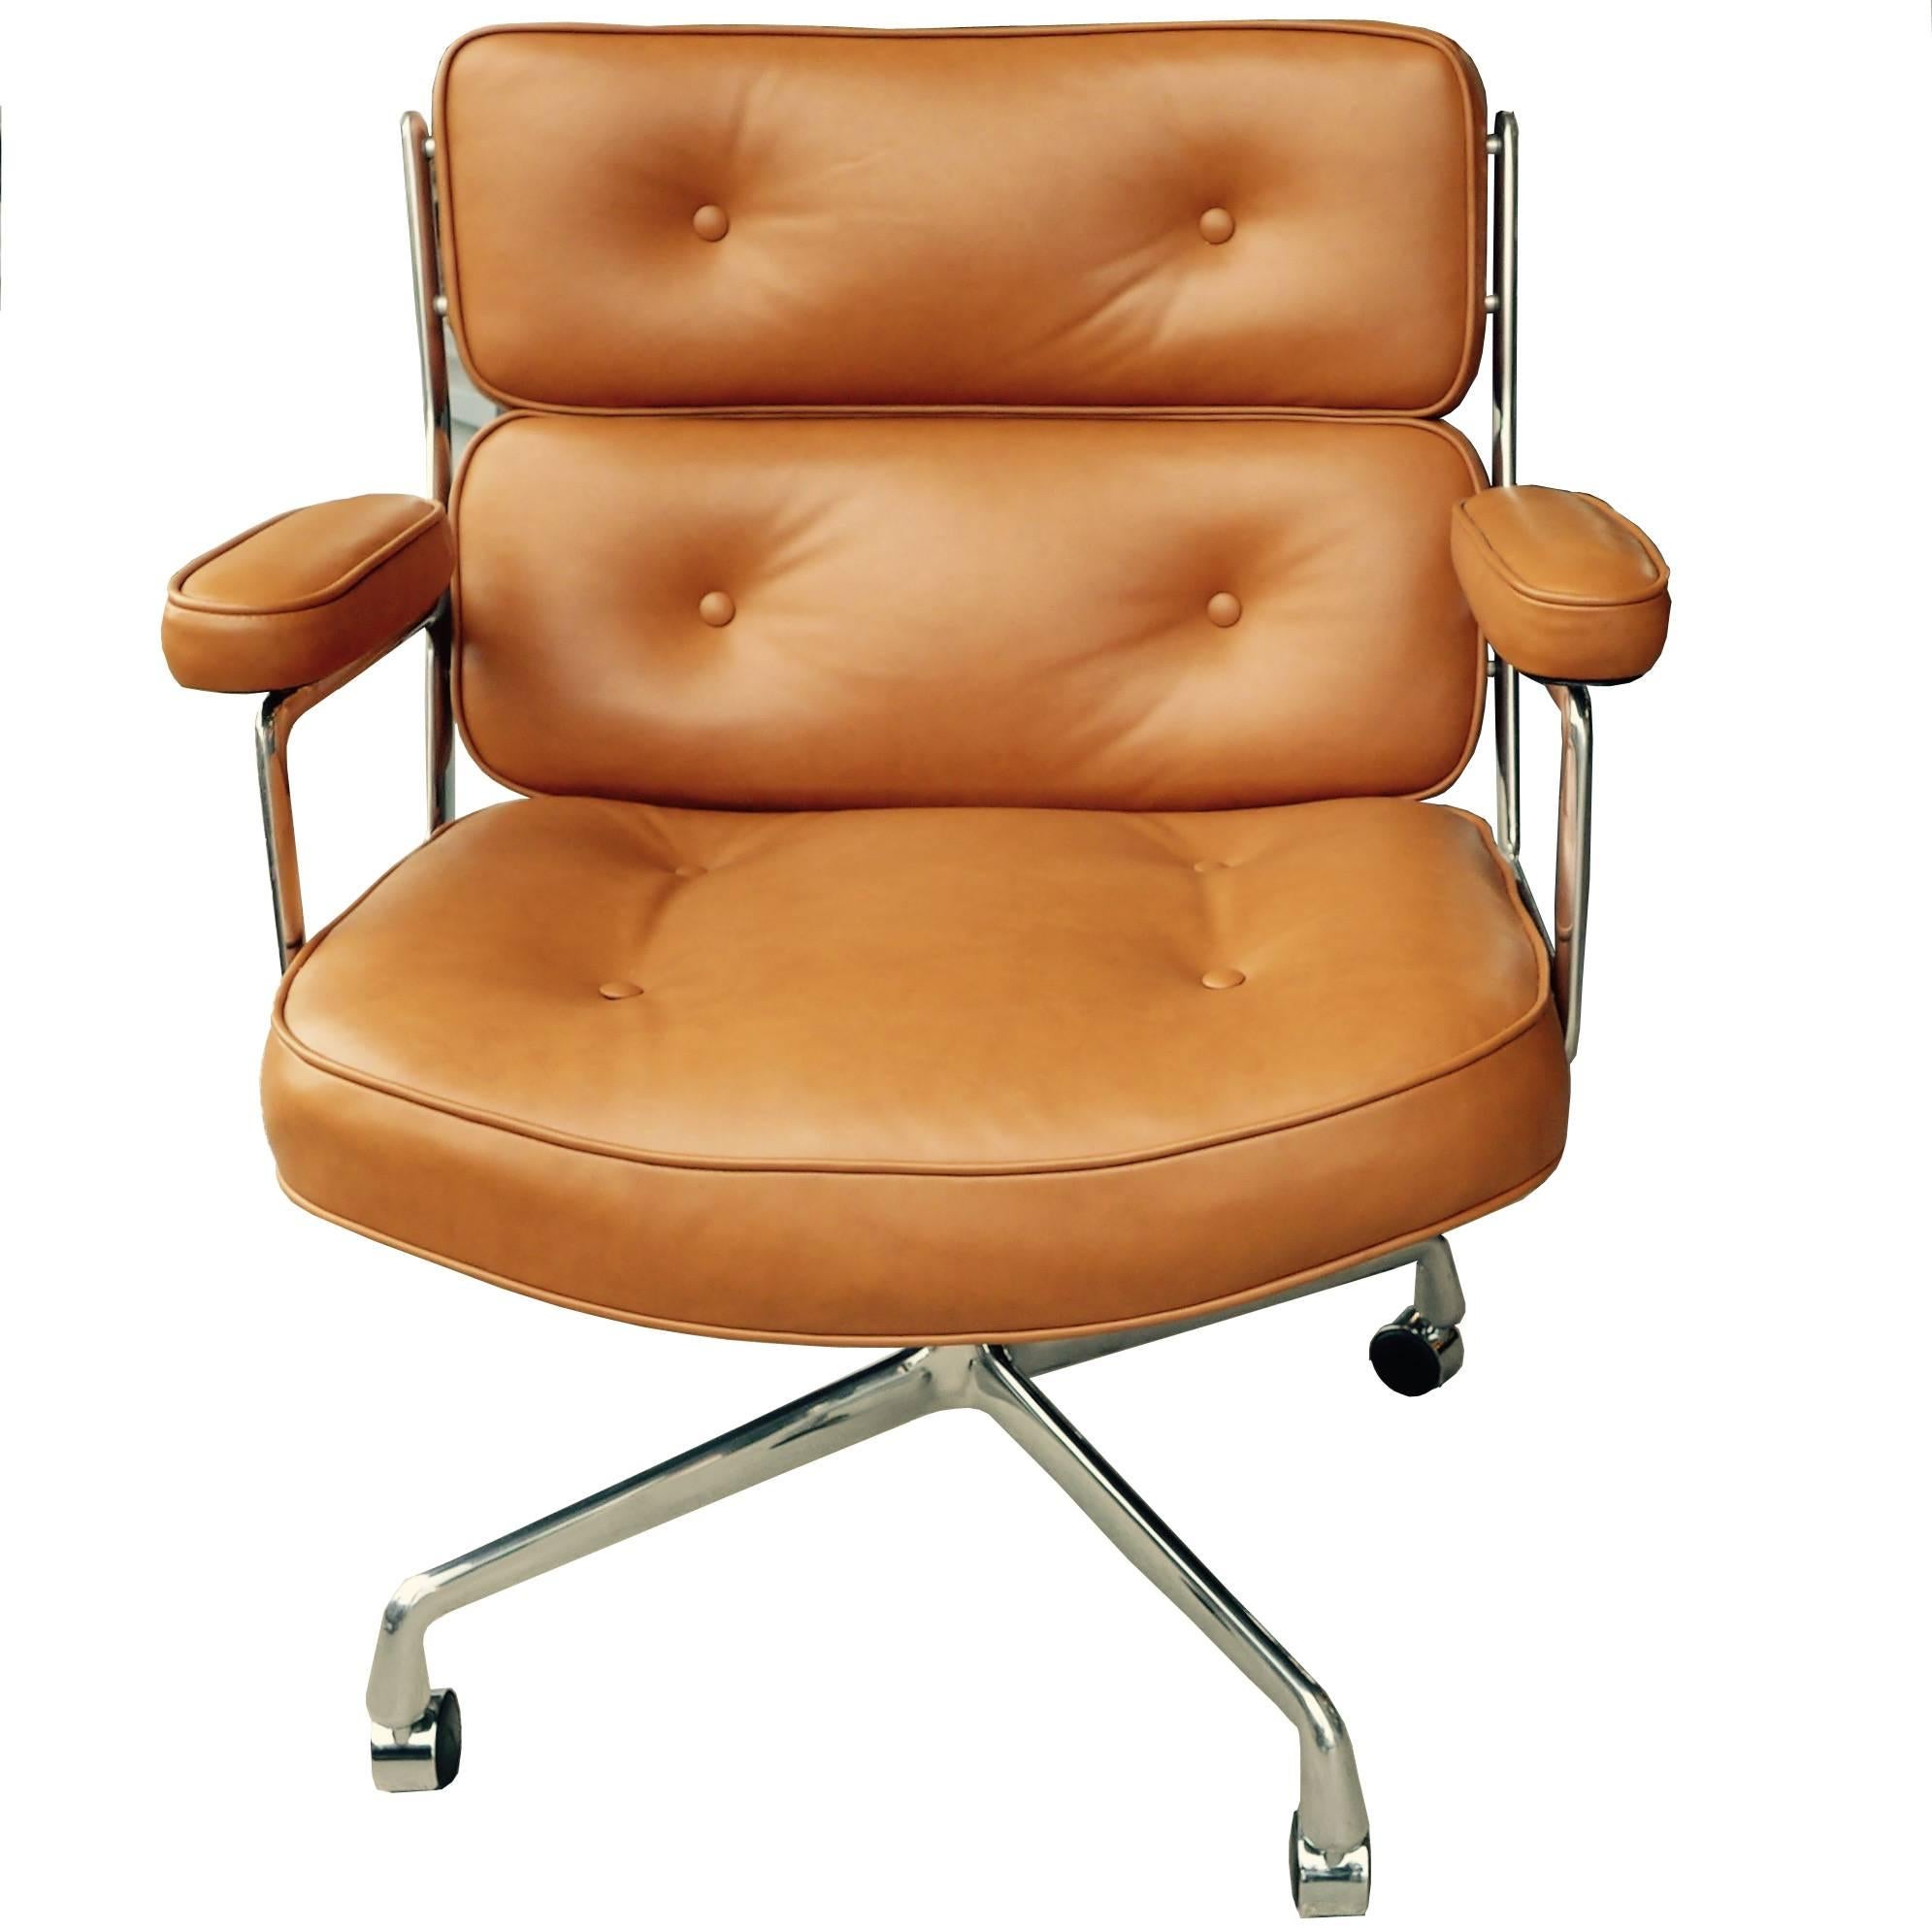 This rare extra-large version of the Eames Time Life executive office chair was a special order, made for an executive of Xerox in the 1970s. The seat size is larger, similar to the Time Life lobby chair, yet it has all the functions of the Time